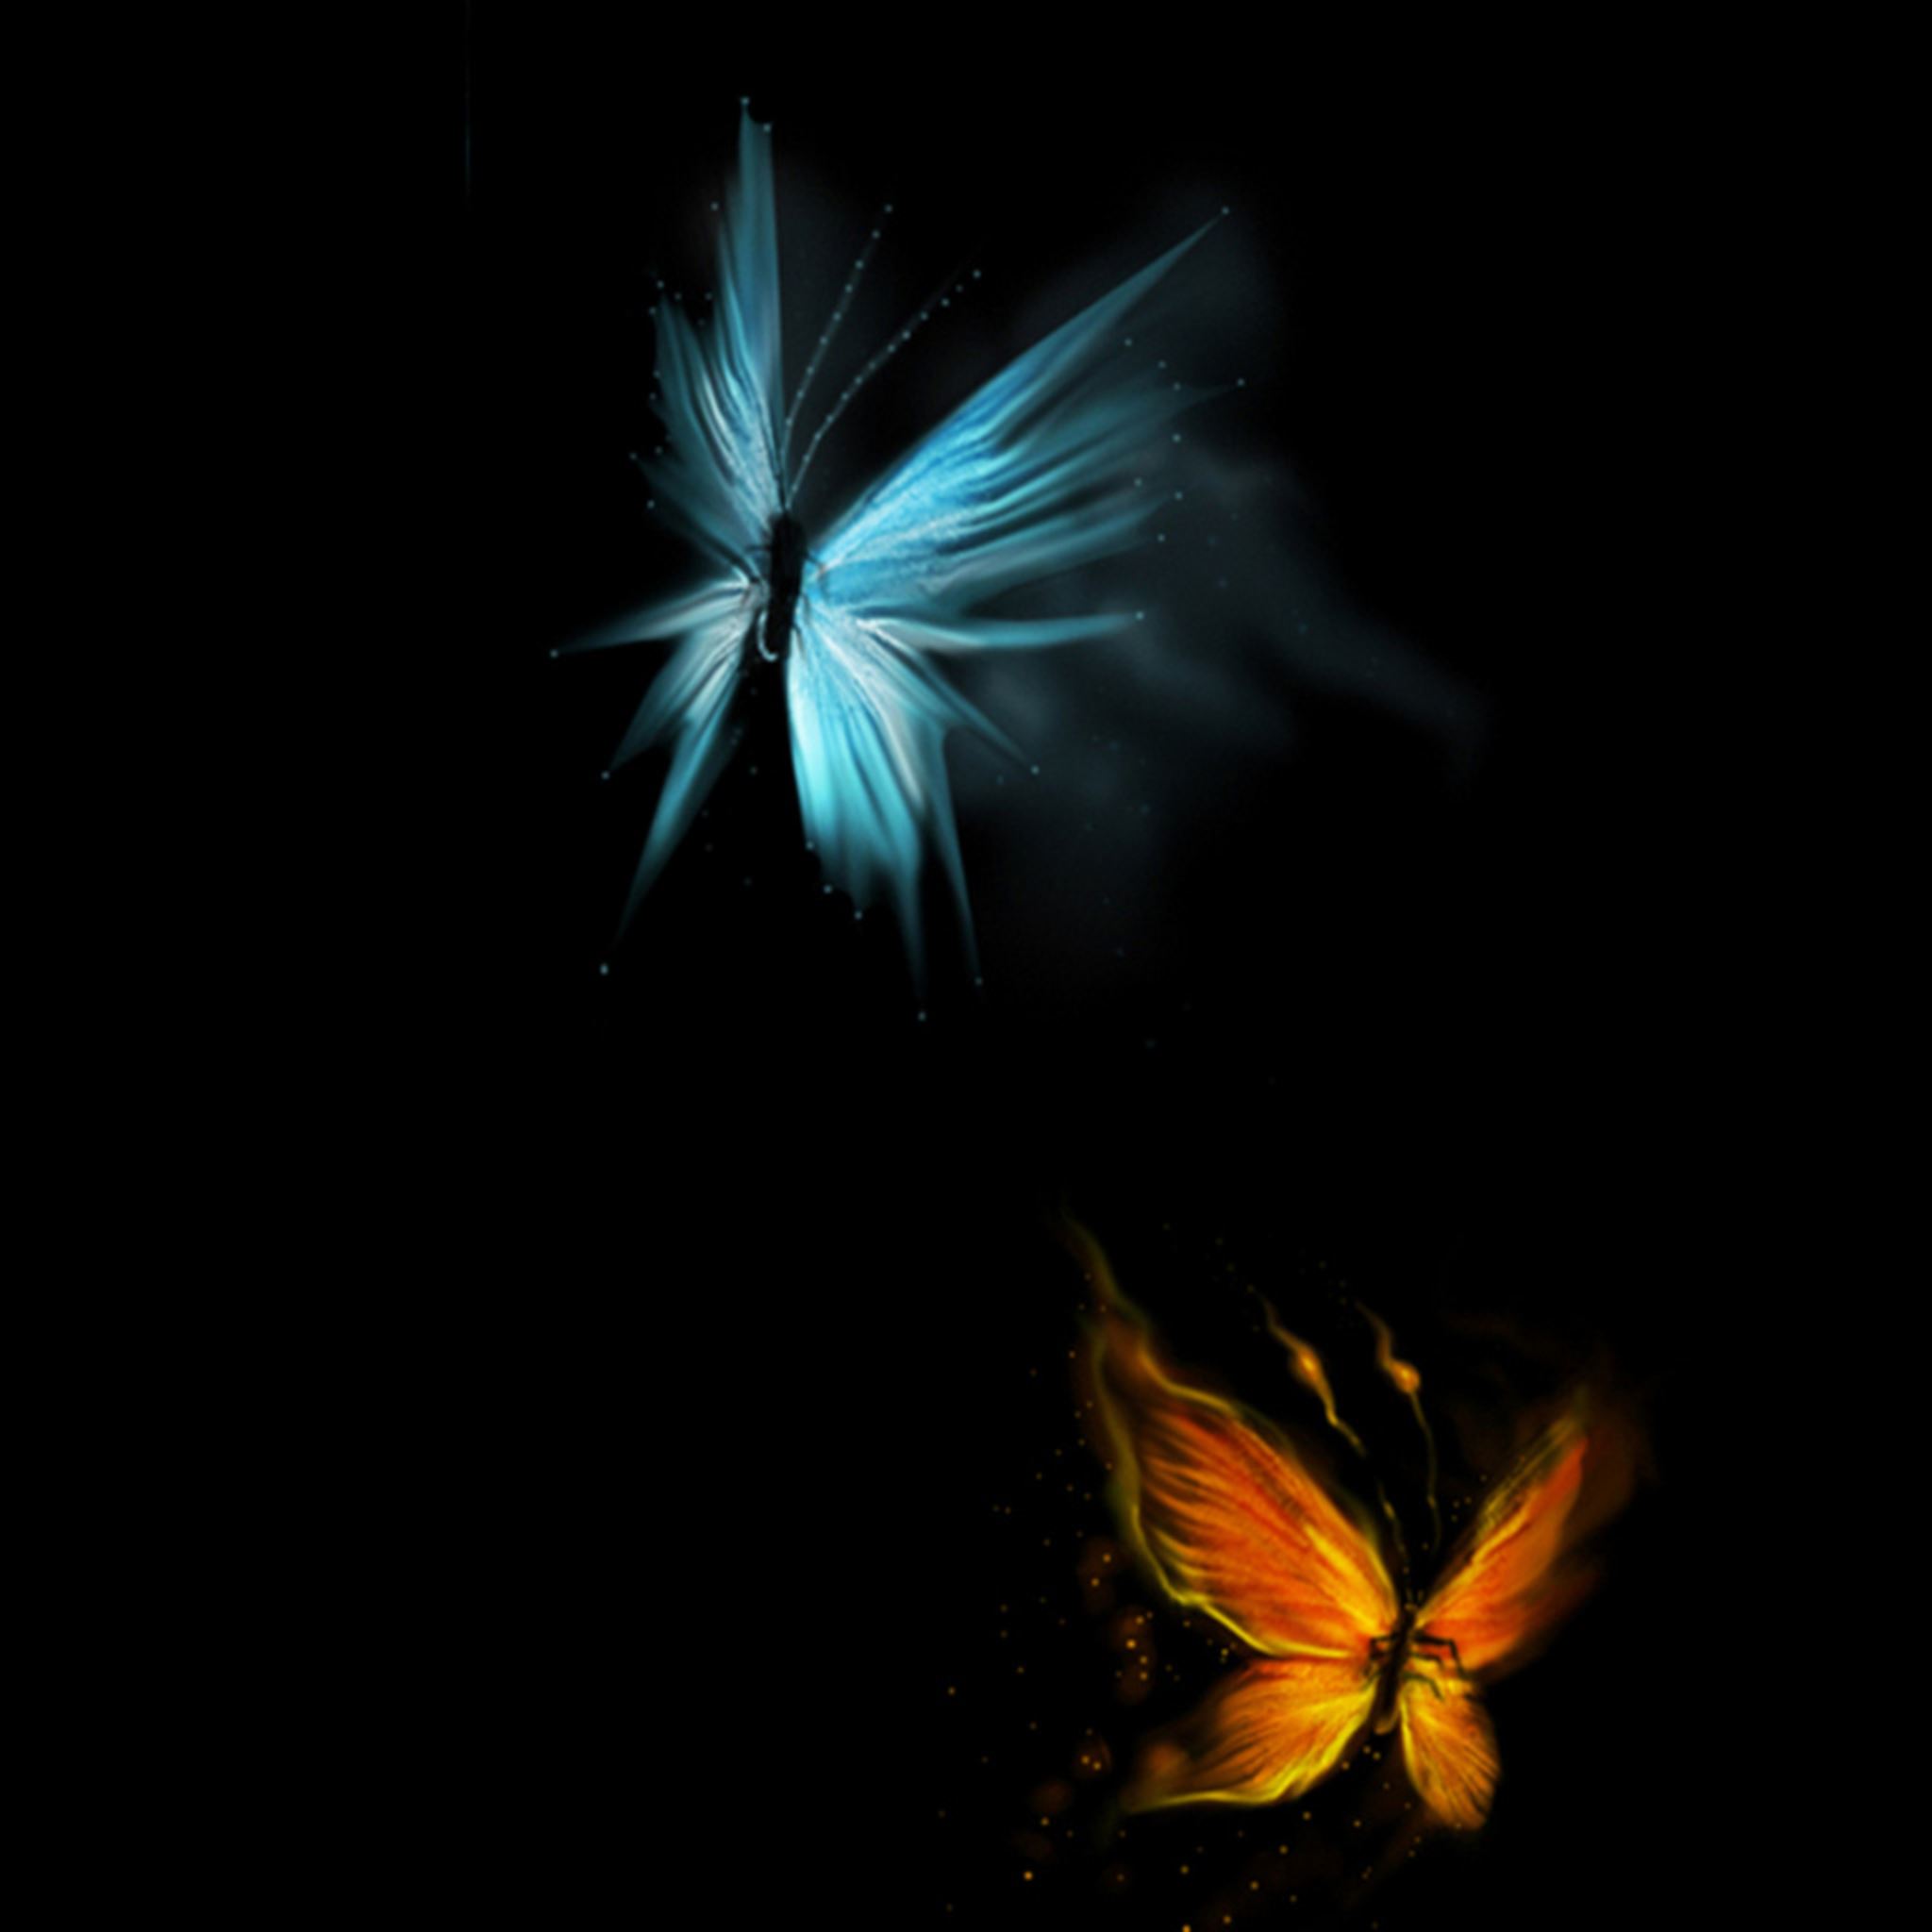 Abstract butterfly art ipad air wallpapers free download